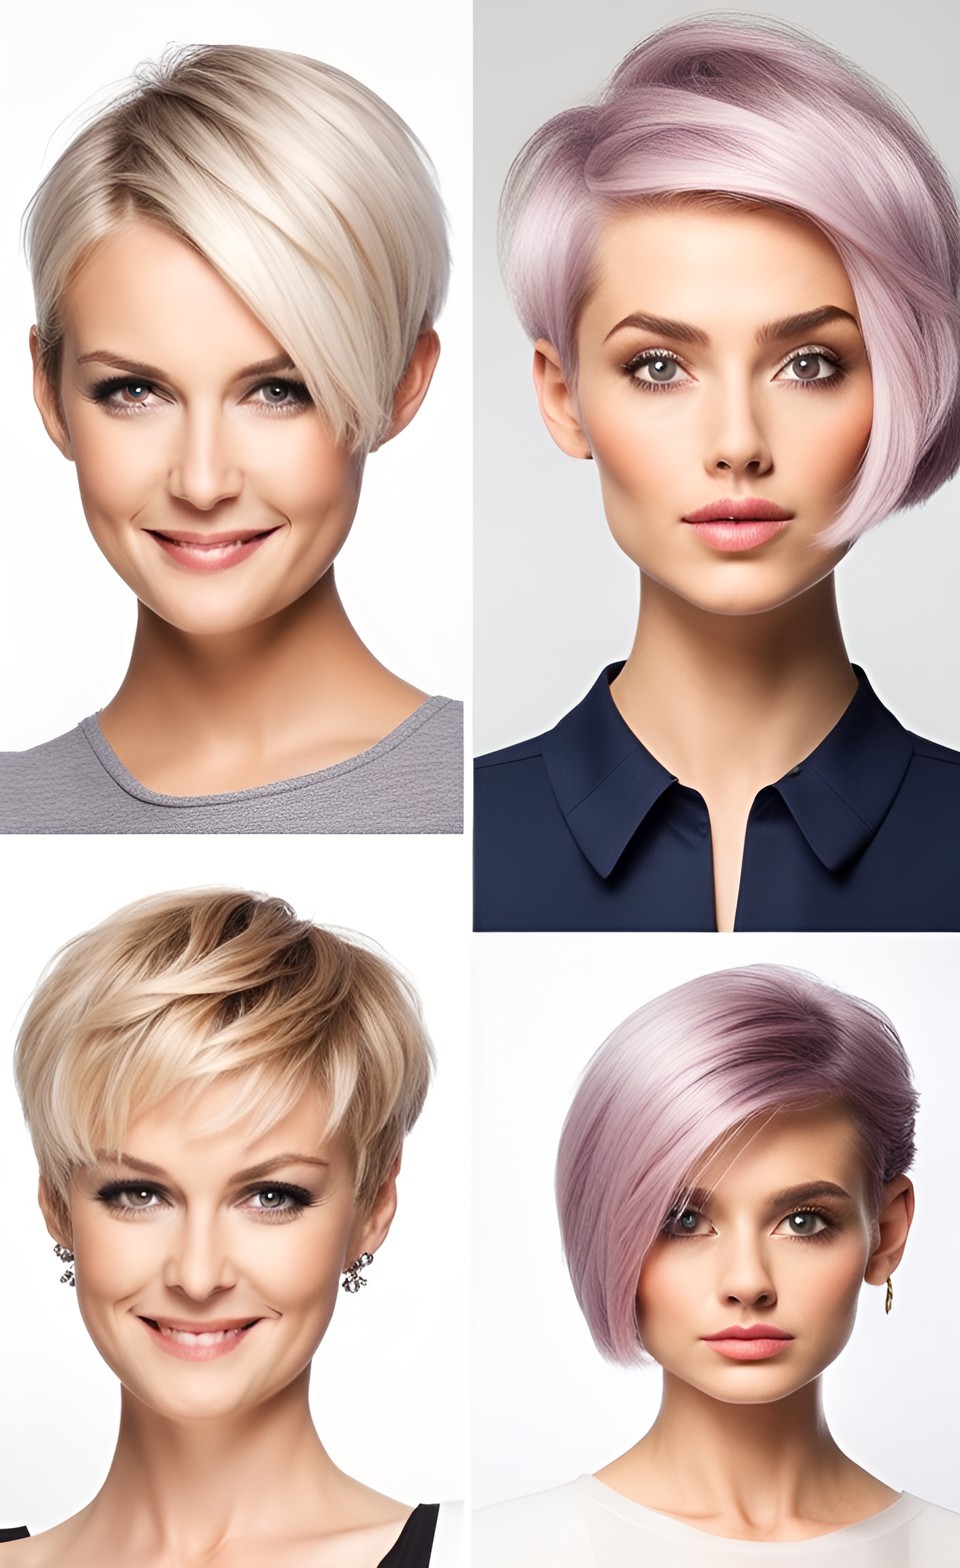 Stunning And Sassy Short Hairstyles For Fine Hair That Are Too Cute For Words